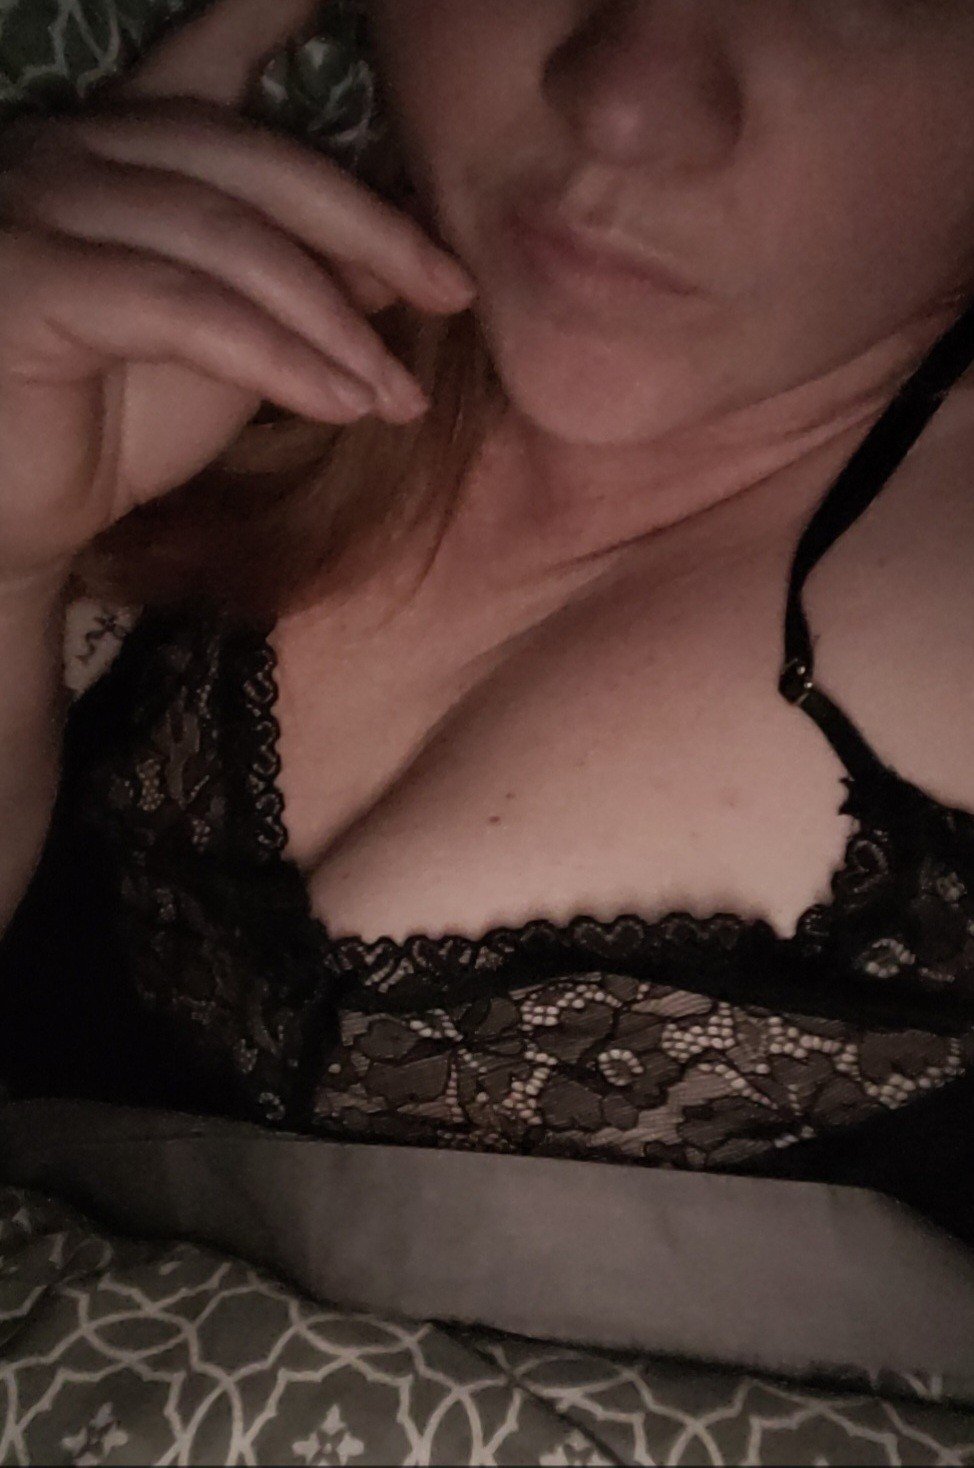 Photo by enchantress.crystal with the username @enchantress.crystal, who is a verified user,  January 19, 2022 at 4:55 AM. The post is about the topic BBW Dangerous Curves & Big Cocks and the text says 'love this top! anyone else?'